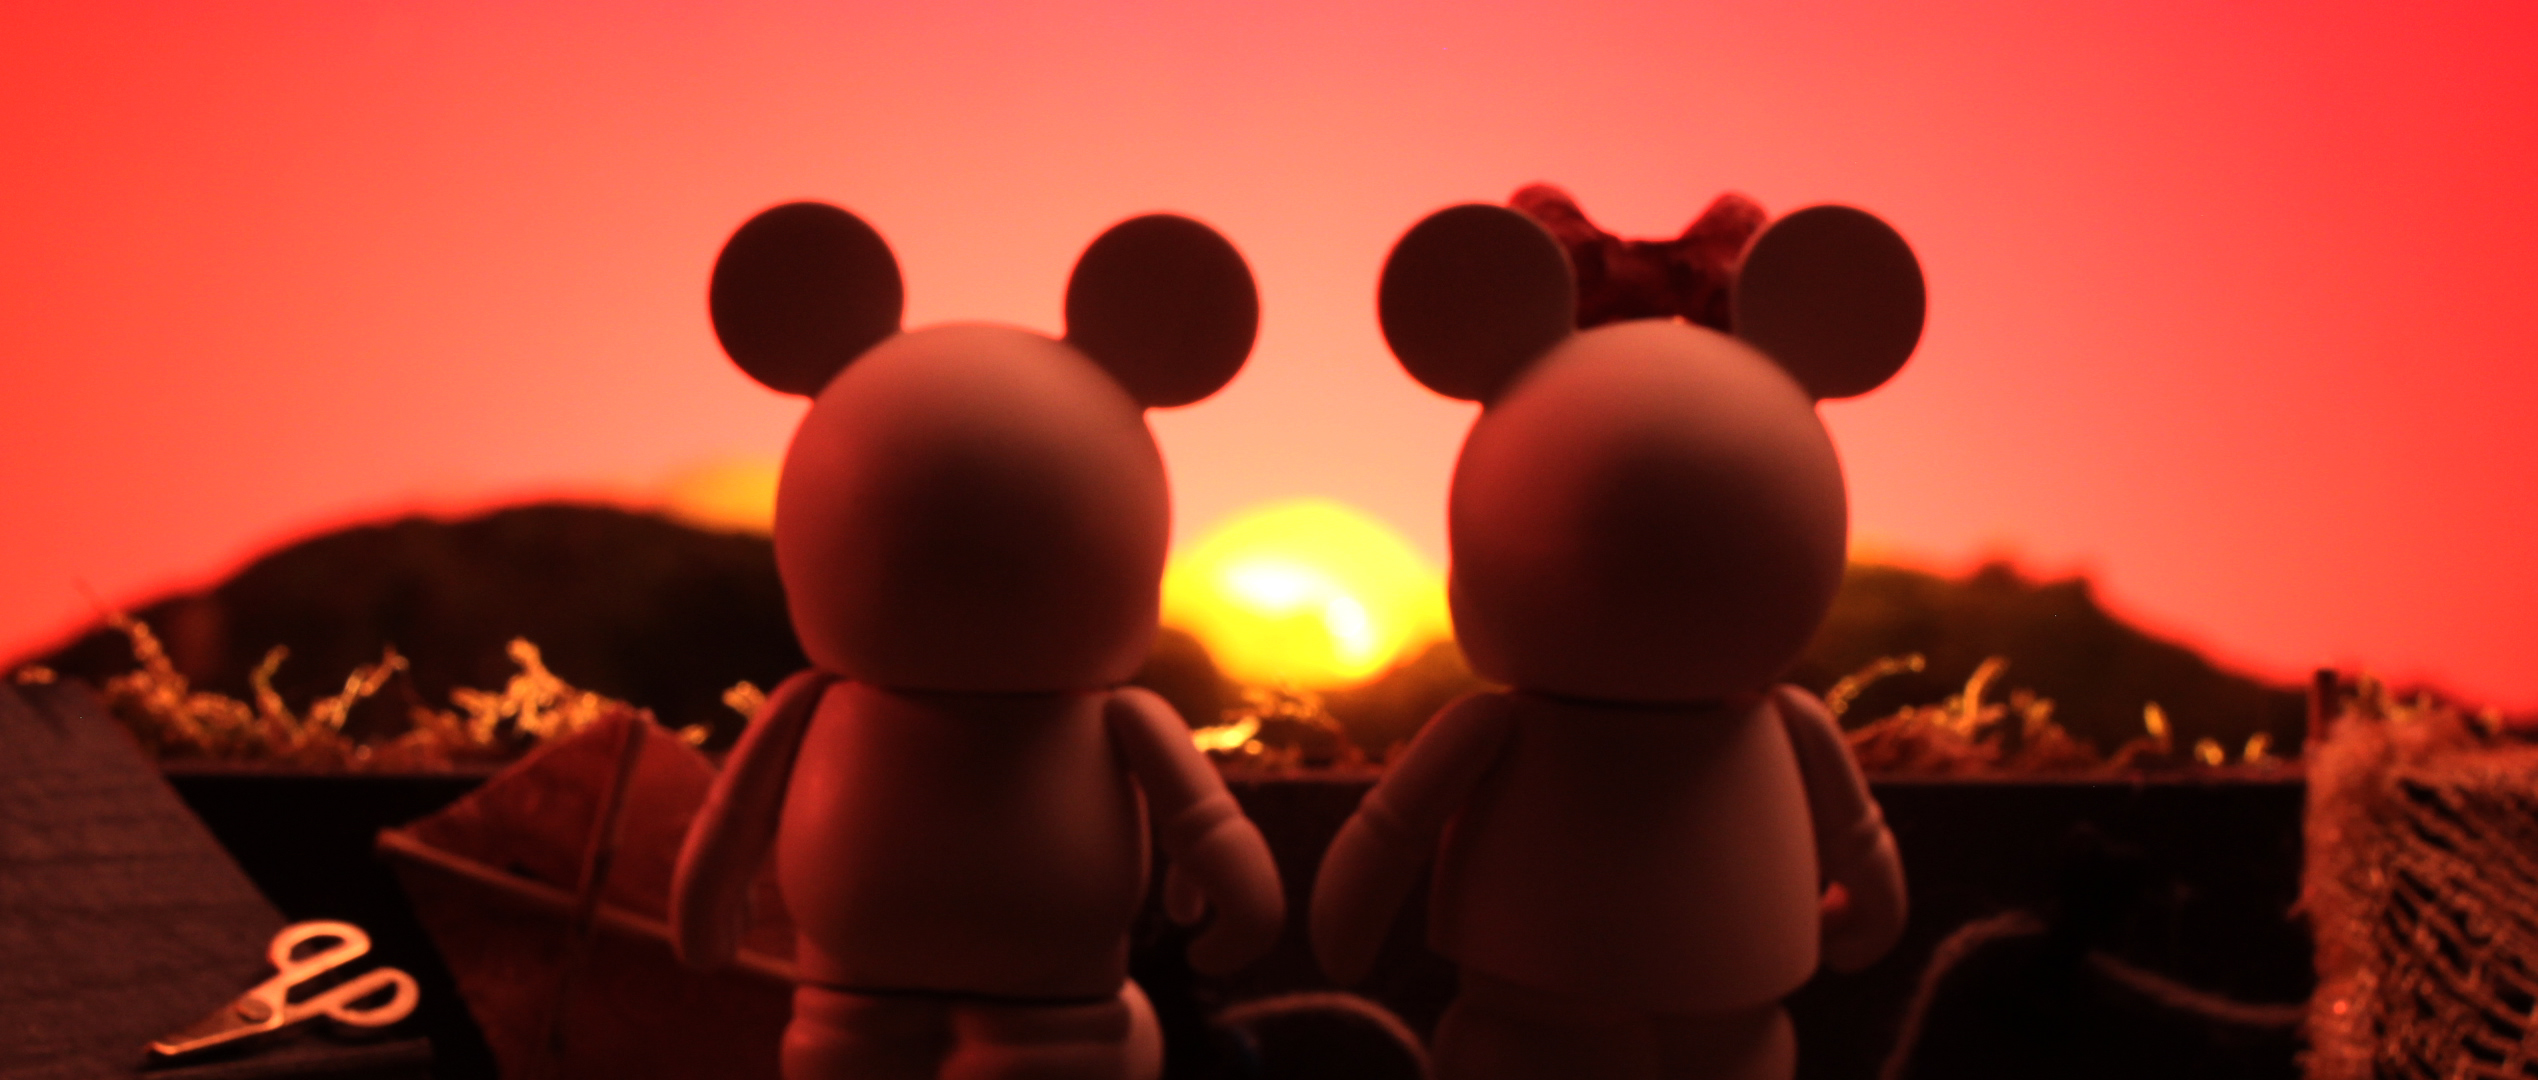 Celebrate Valentine’s Day with “Blank: A Vinylmation Love Story” at the El Capitan Theatre in Hollywood